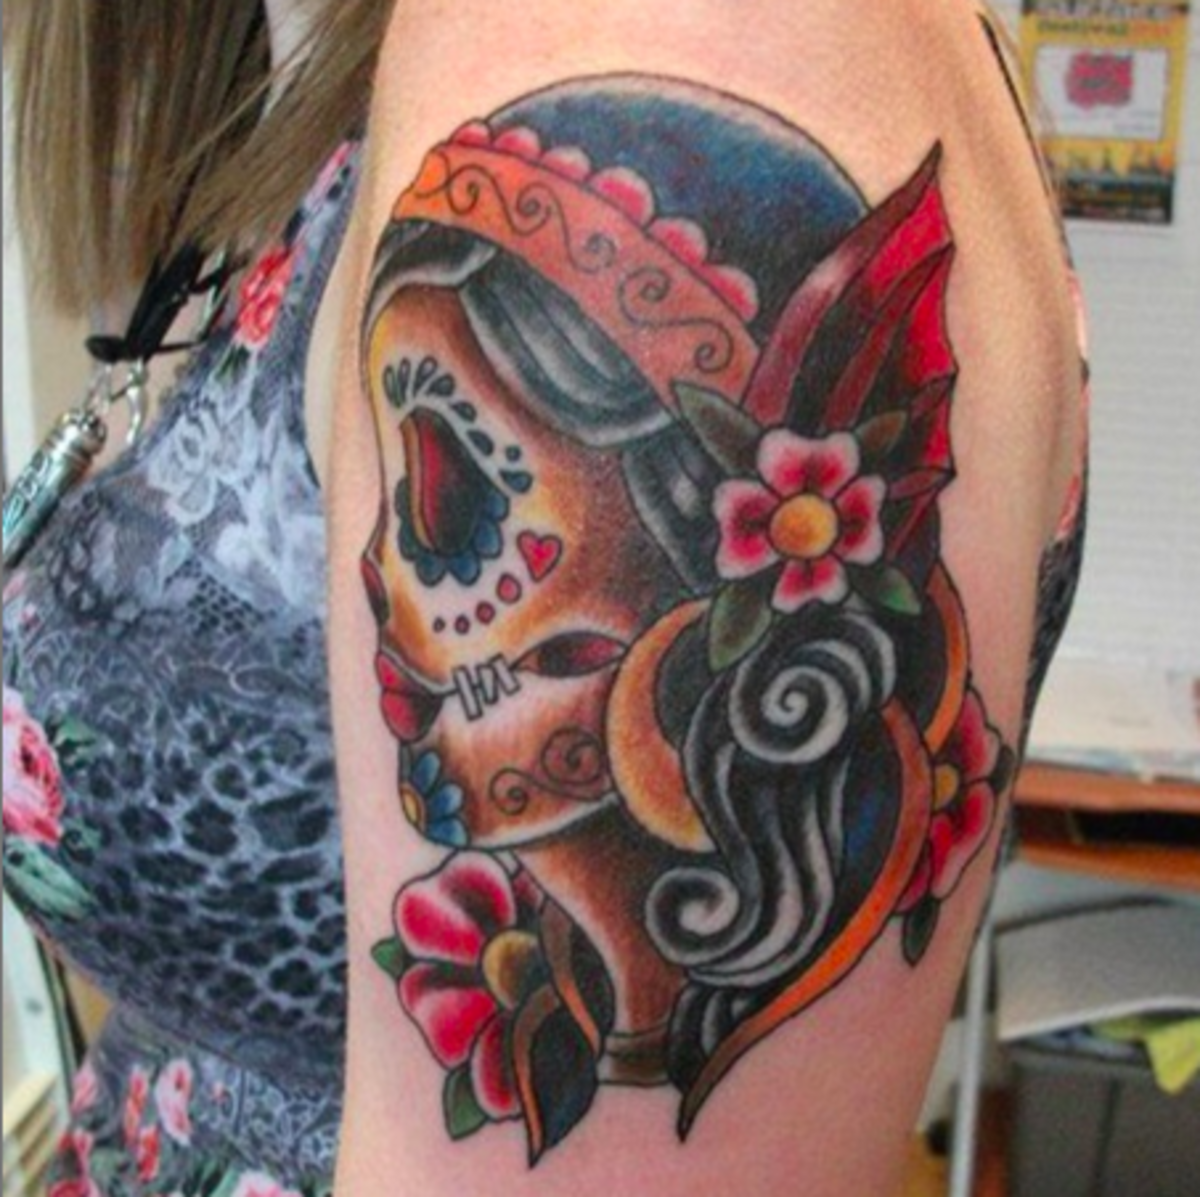 Gypsy Tattoo Designs Ideas Meanings With Photos Tatring